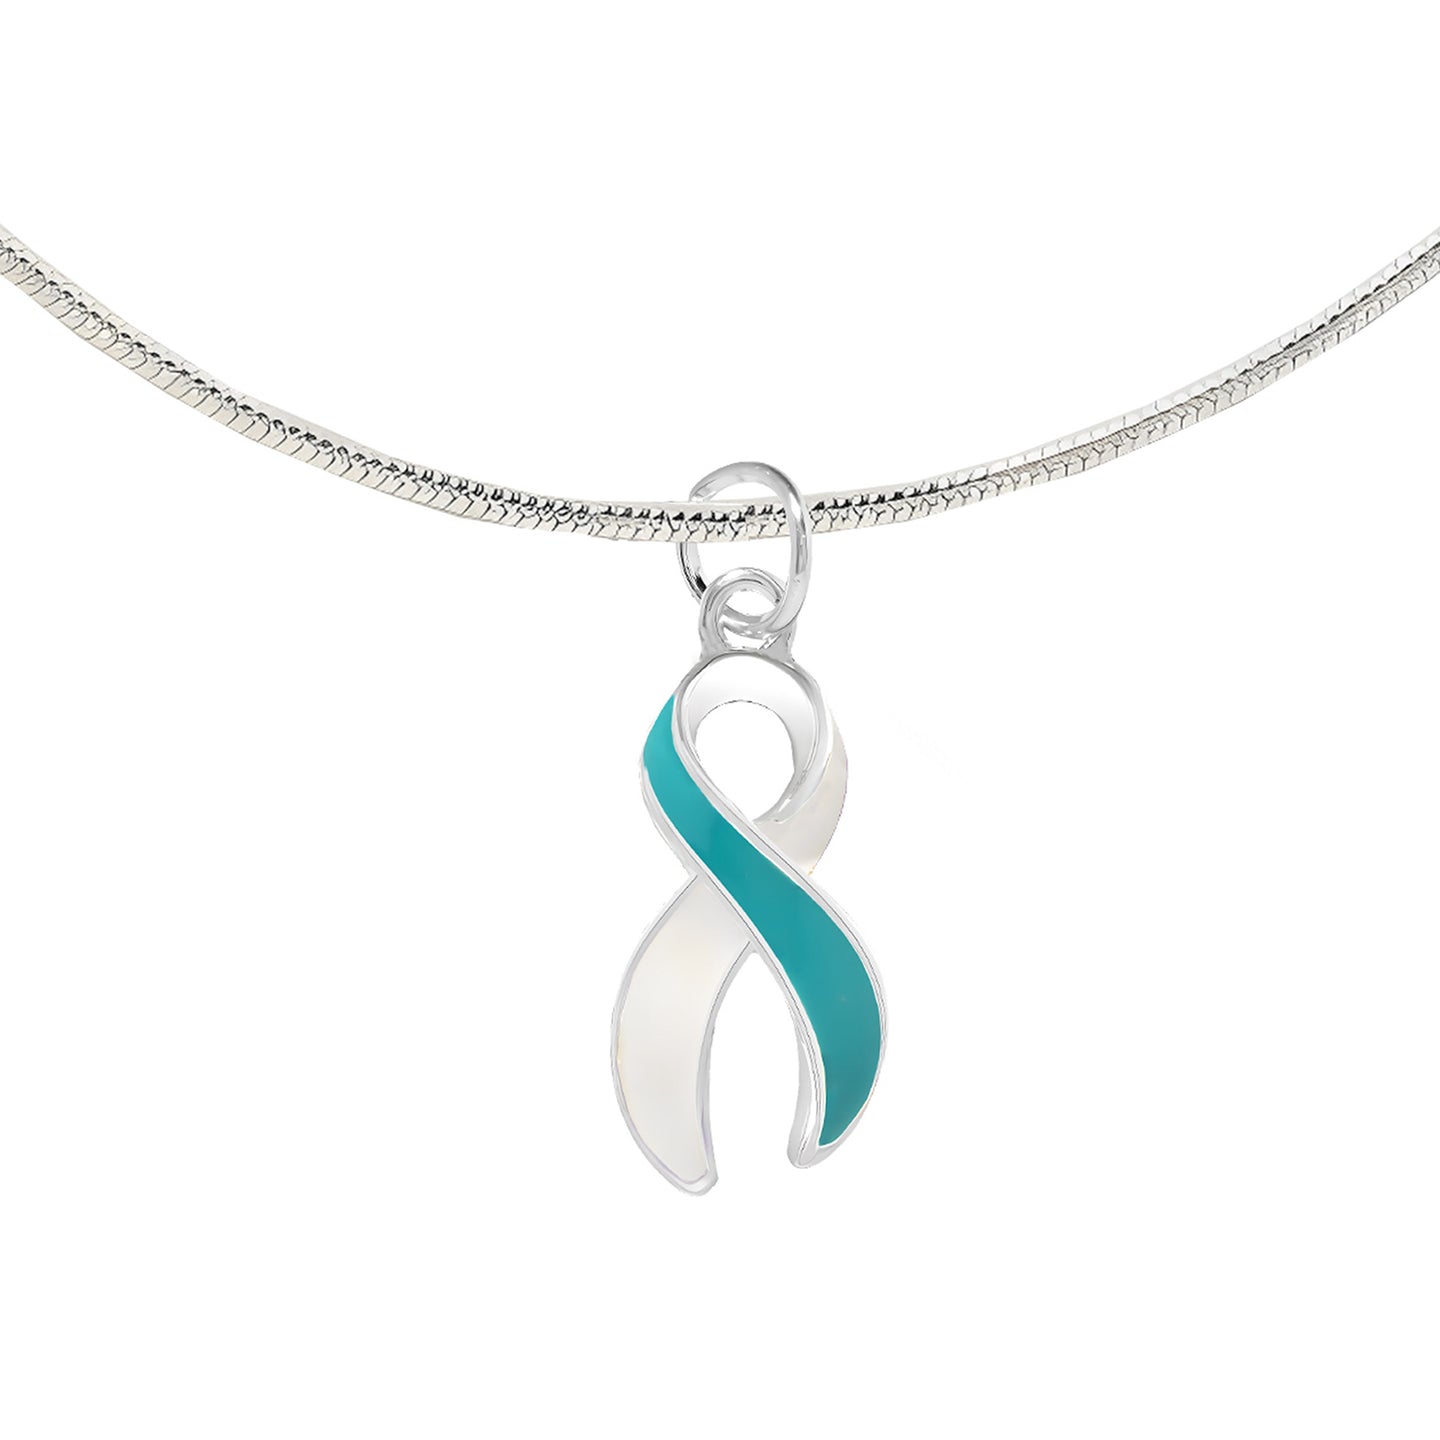 Large Teal & White Ribbon Necklaces